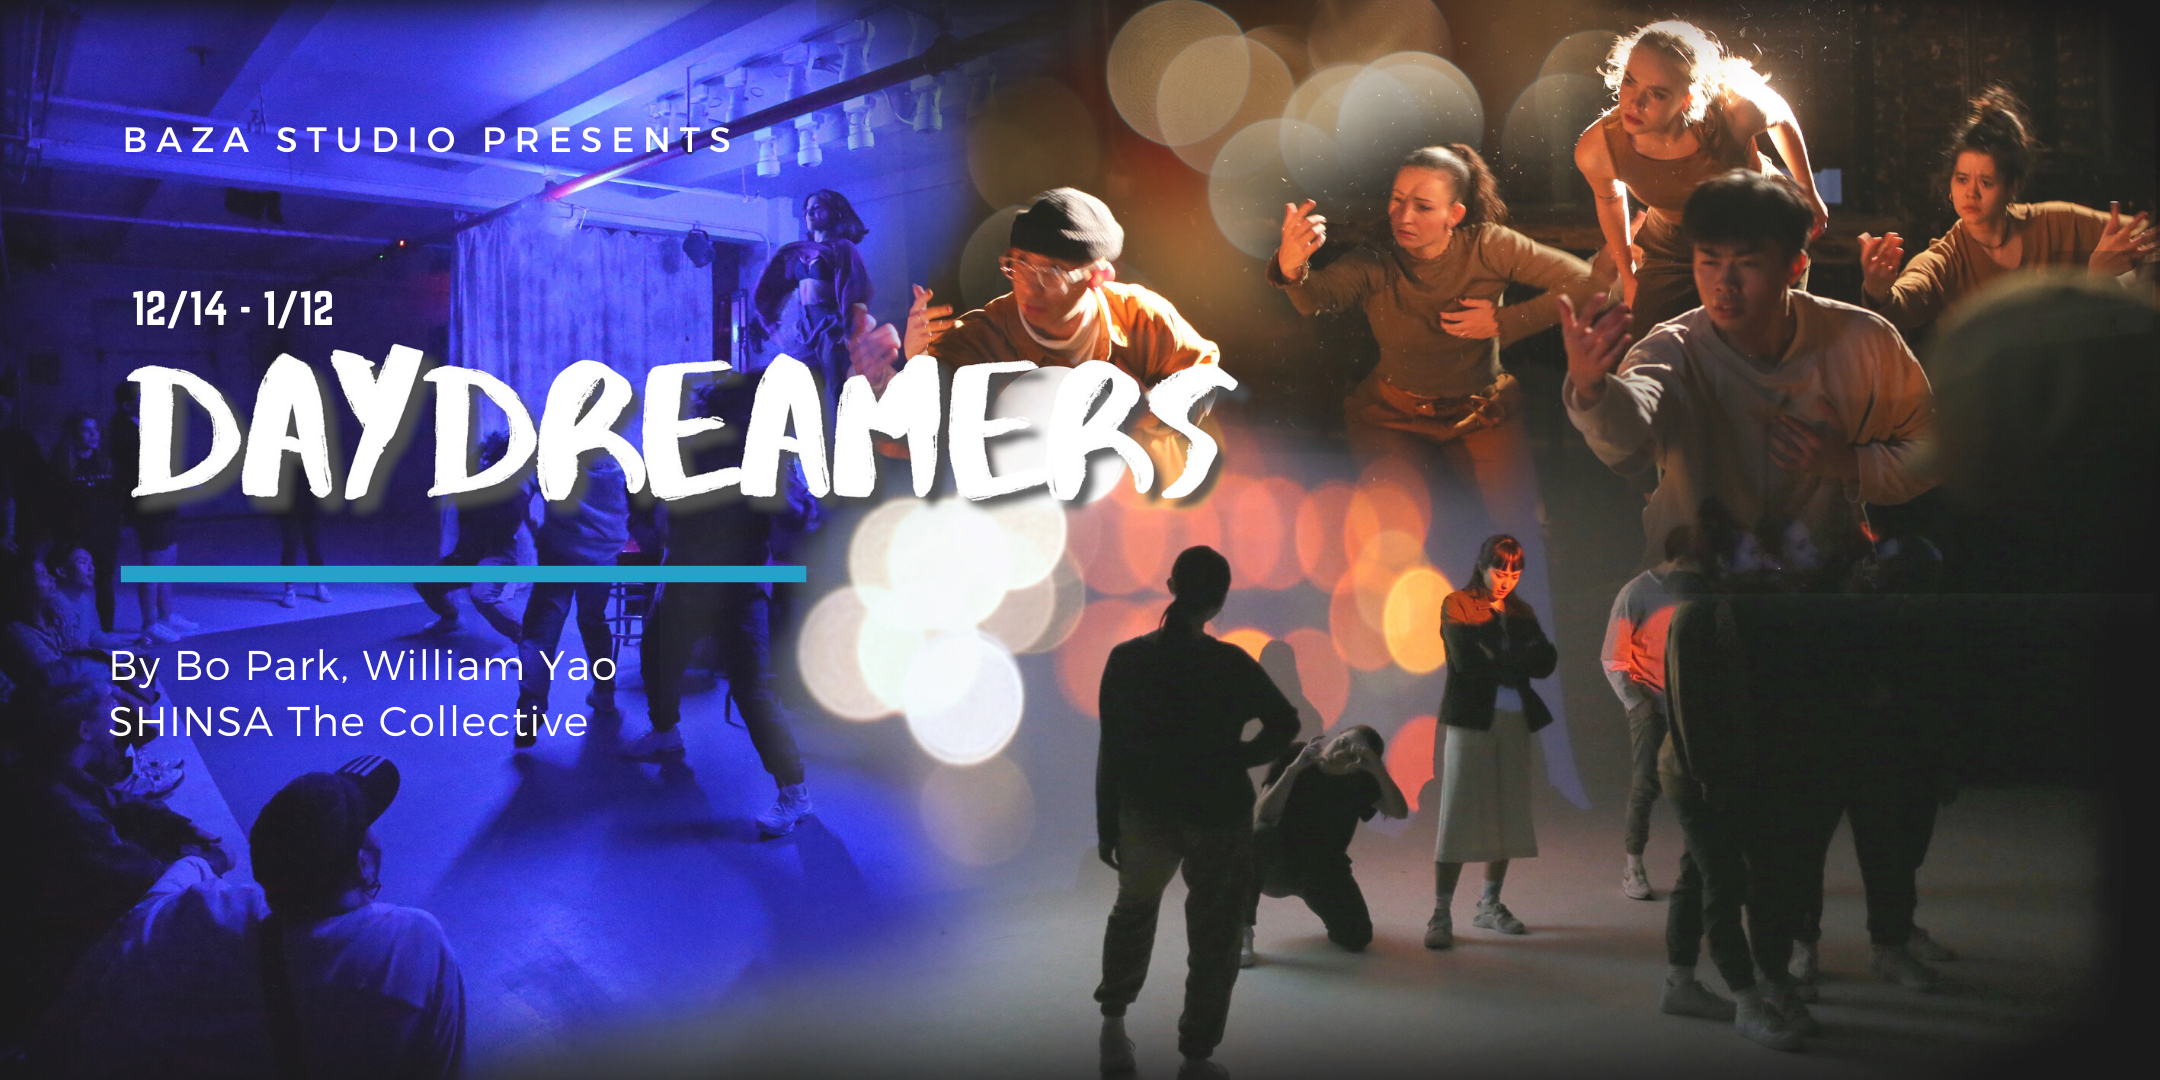 DAYDREAMERS An Immersive Dance Show by Bo Park & William Yao